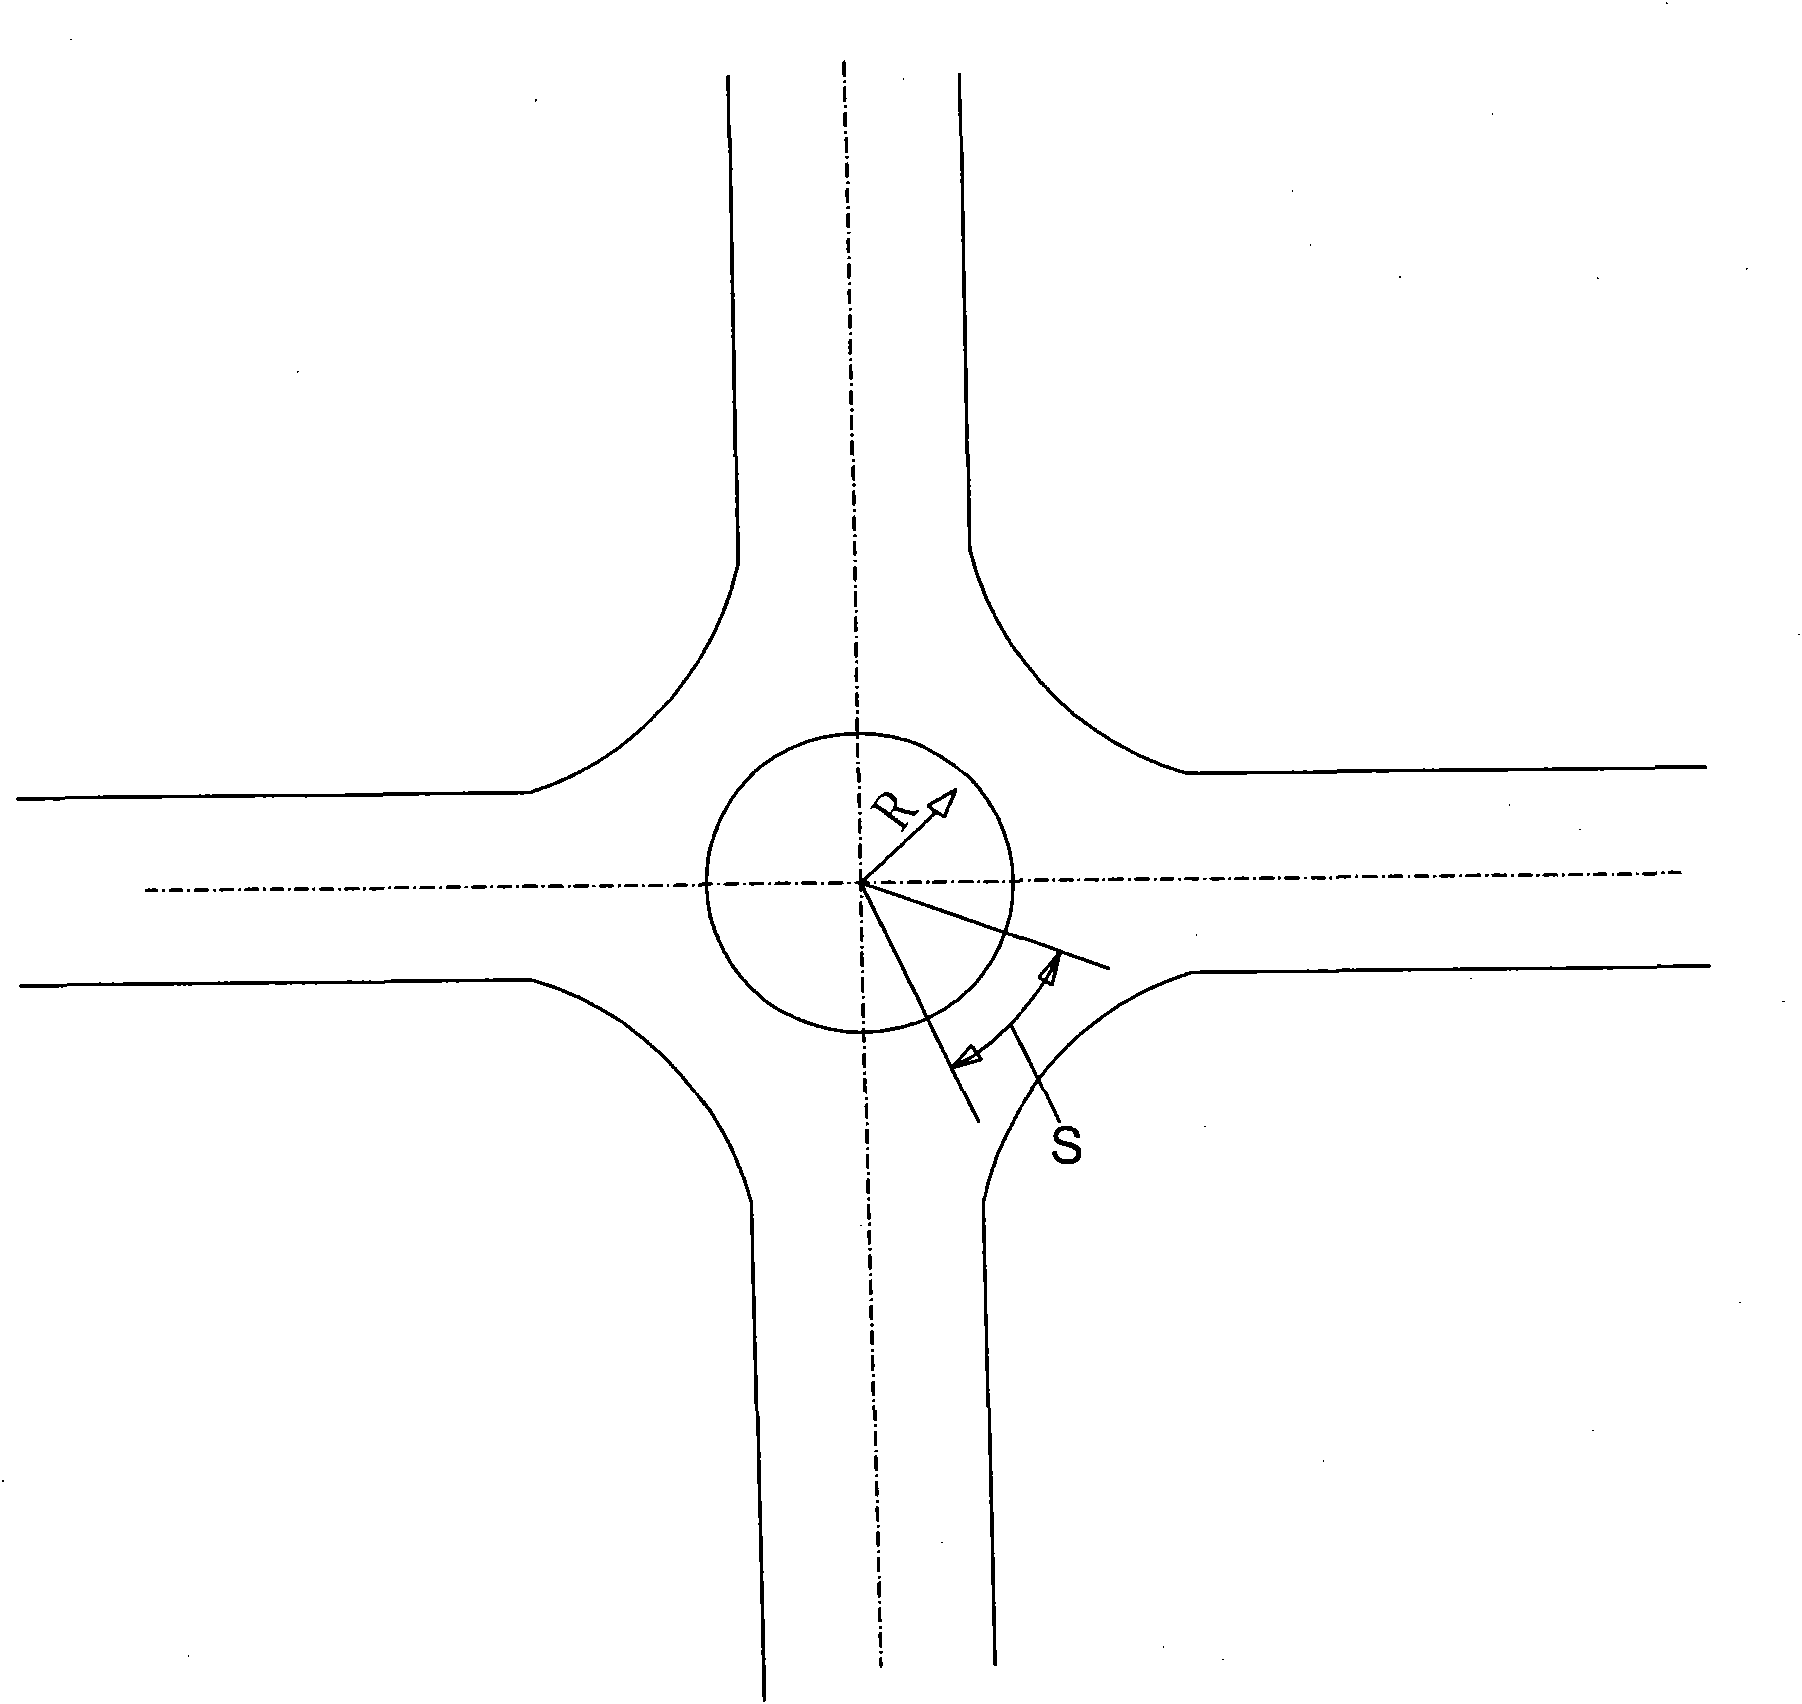 High-efficiency passing method for road intersection